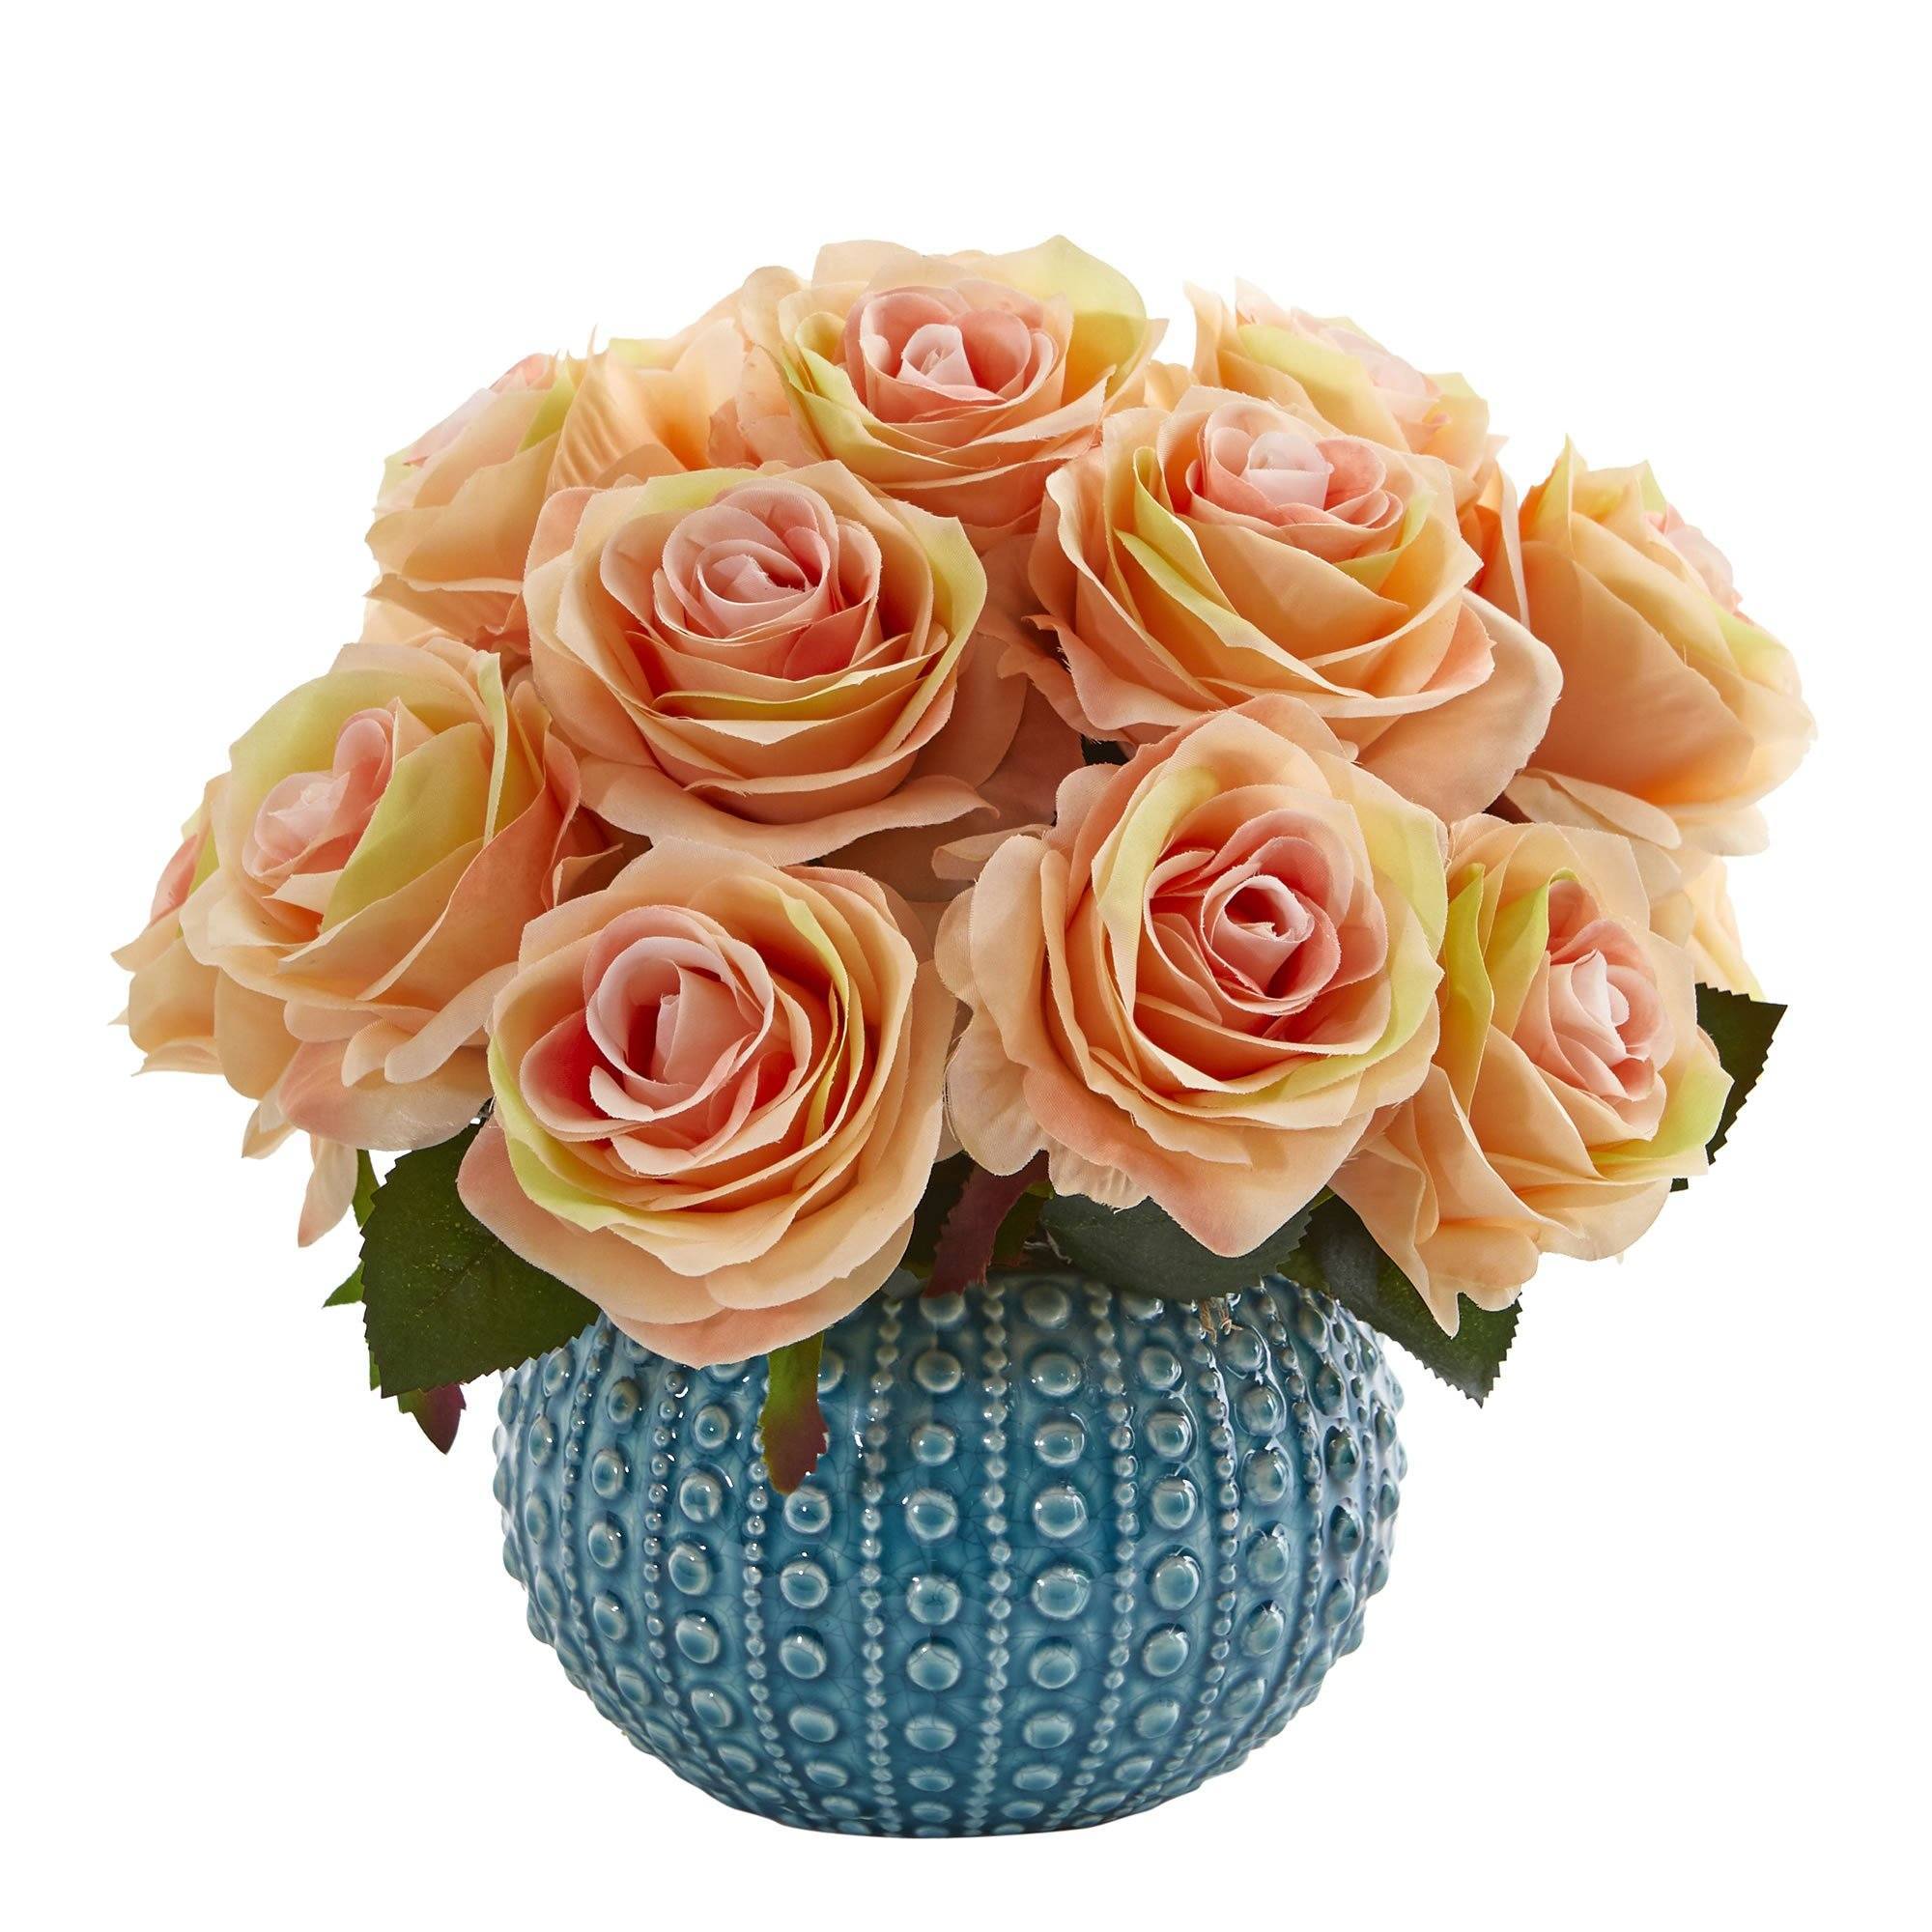 Artificial Arrangement - 11.5" Rose in Blue Ceramic Vase by Nearly Natural